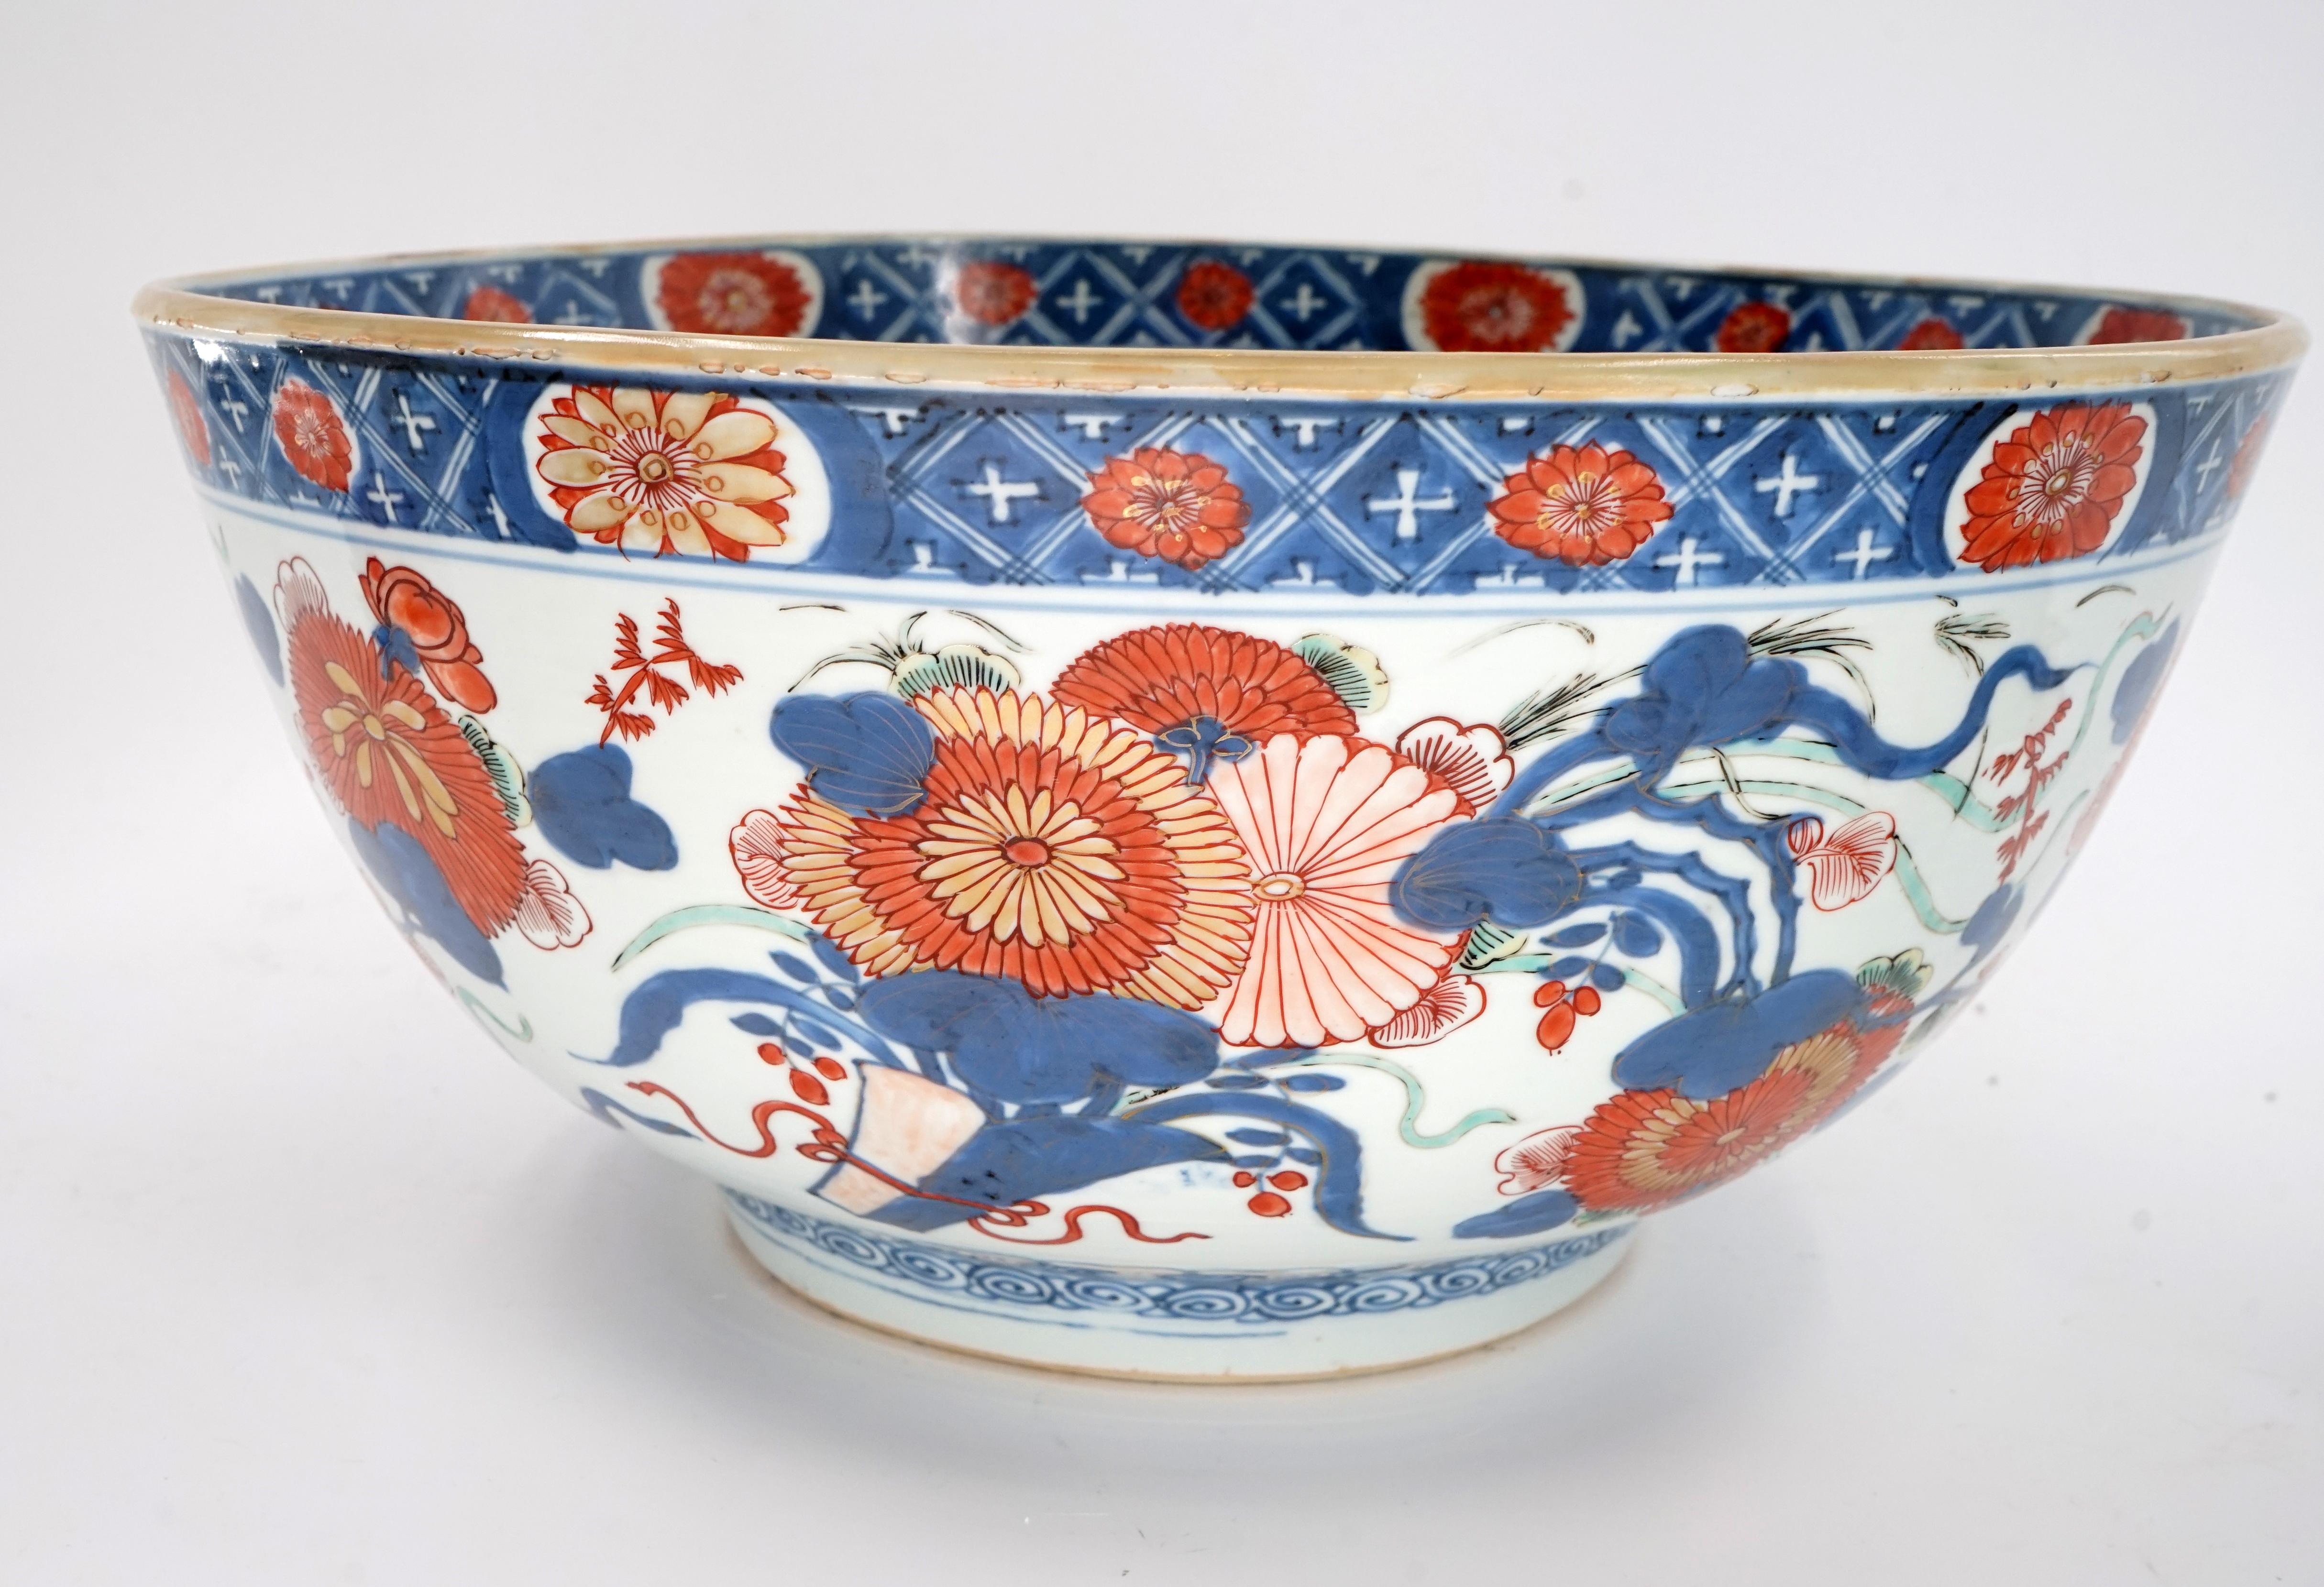 Very Rare Large Chinese Imari Punch Bowl 14 Inches in Diameter

6 1/2 inches in height

Circa 1740 Chinese Kangxi Classic Florida Design

Provenance: Dealer Label Guest and Gray of London (highly respected specialist in Chinese ceramics)

